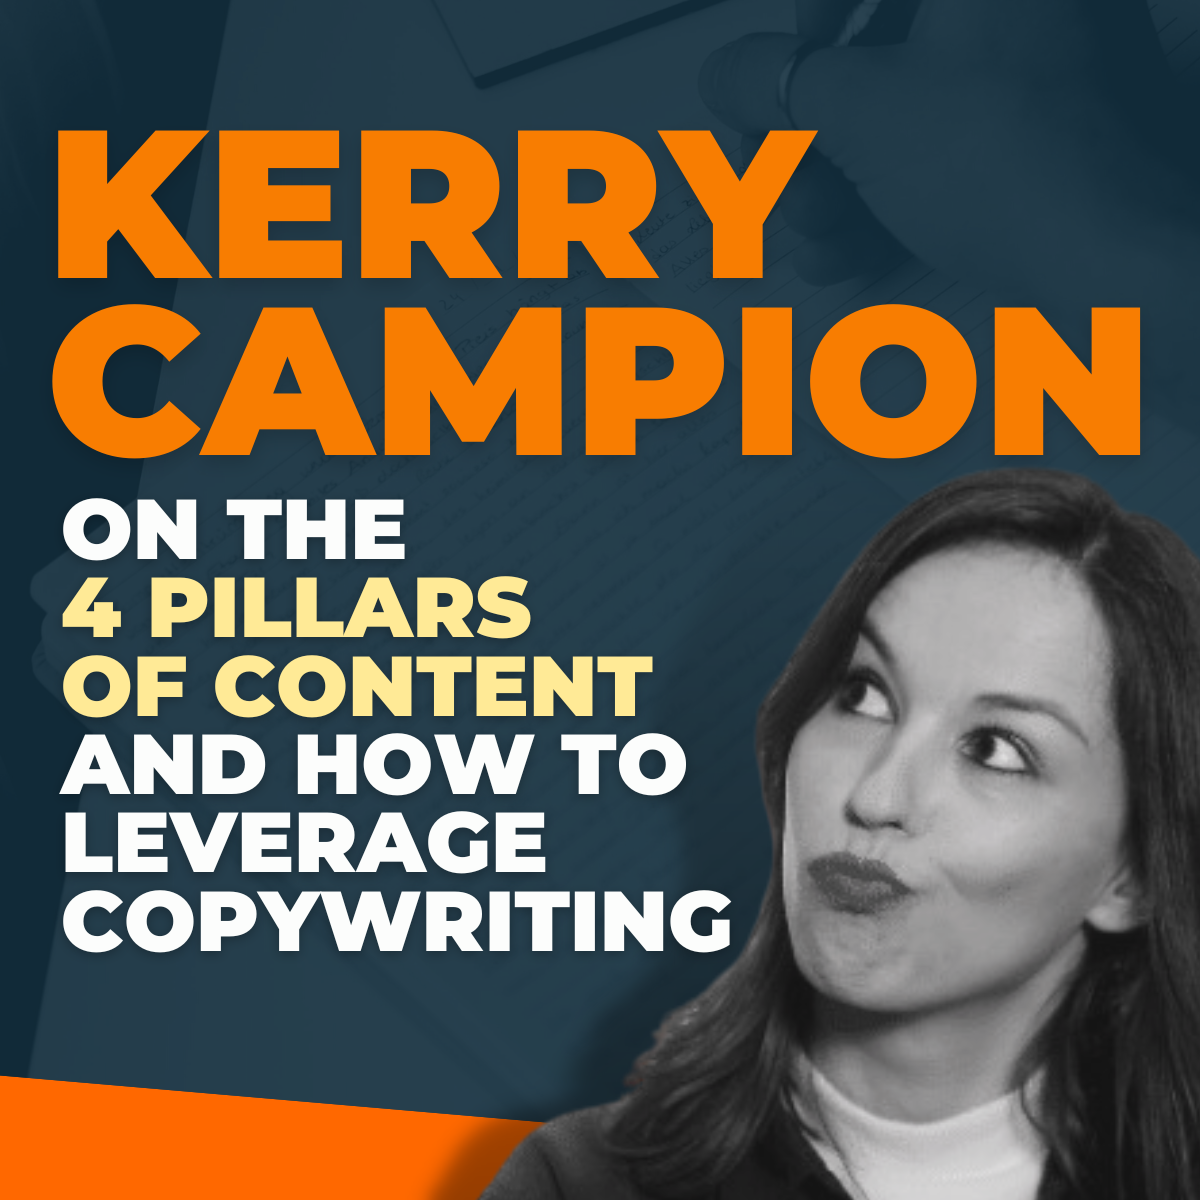 Kerry Campion on the 4 pillars of content and how to leverage copywriting